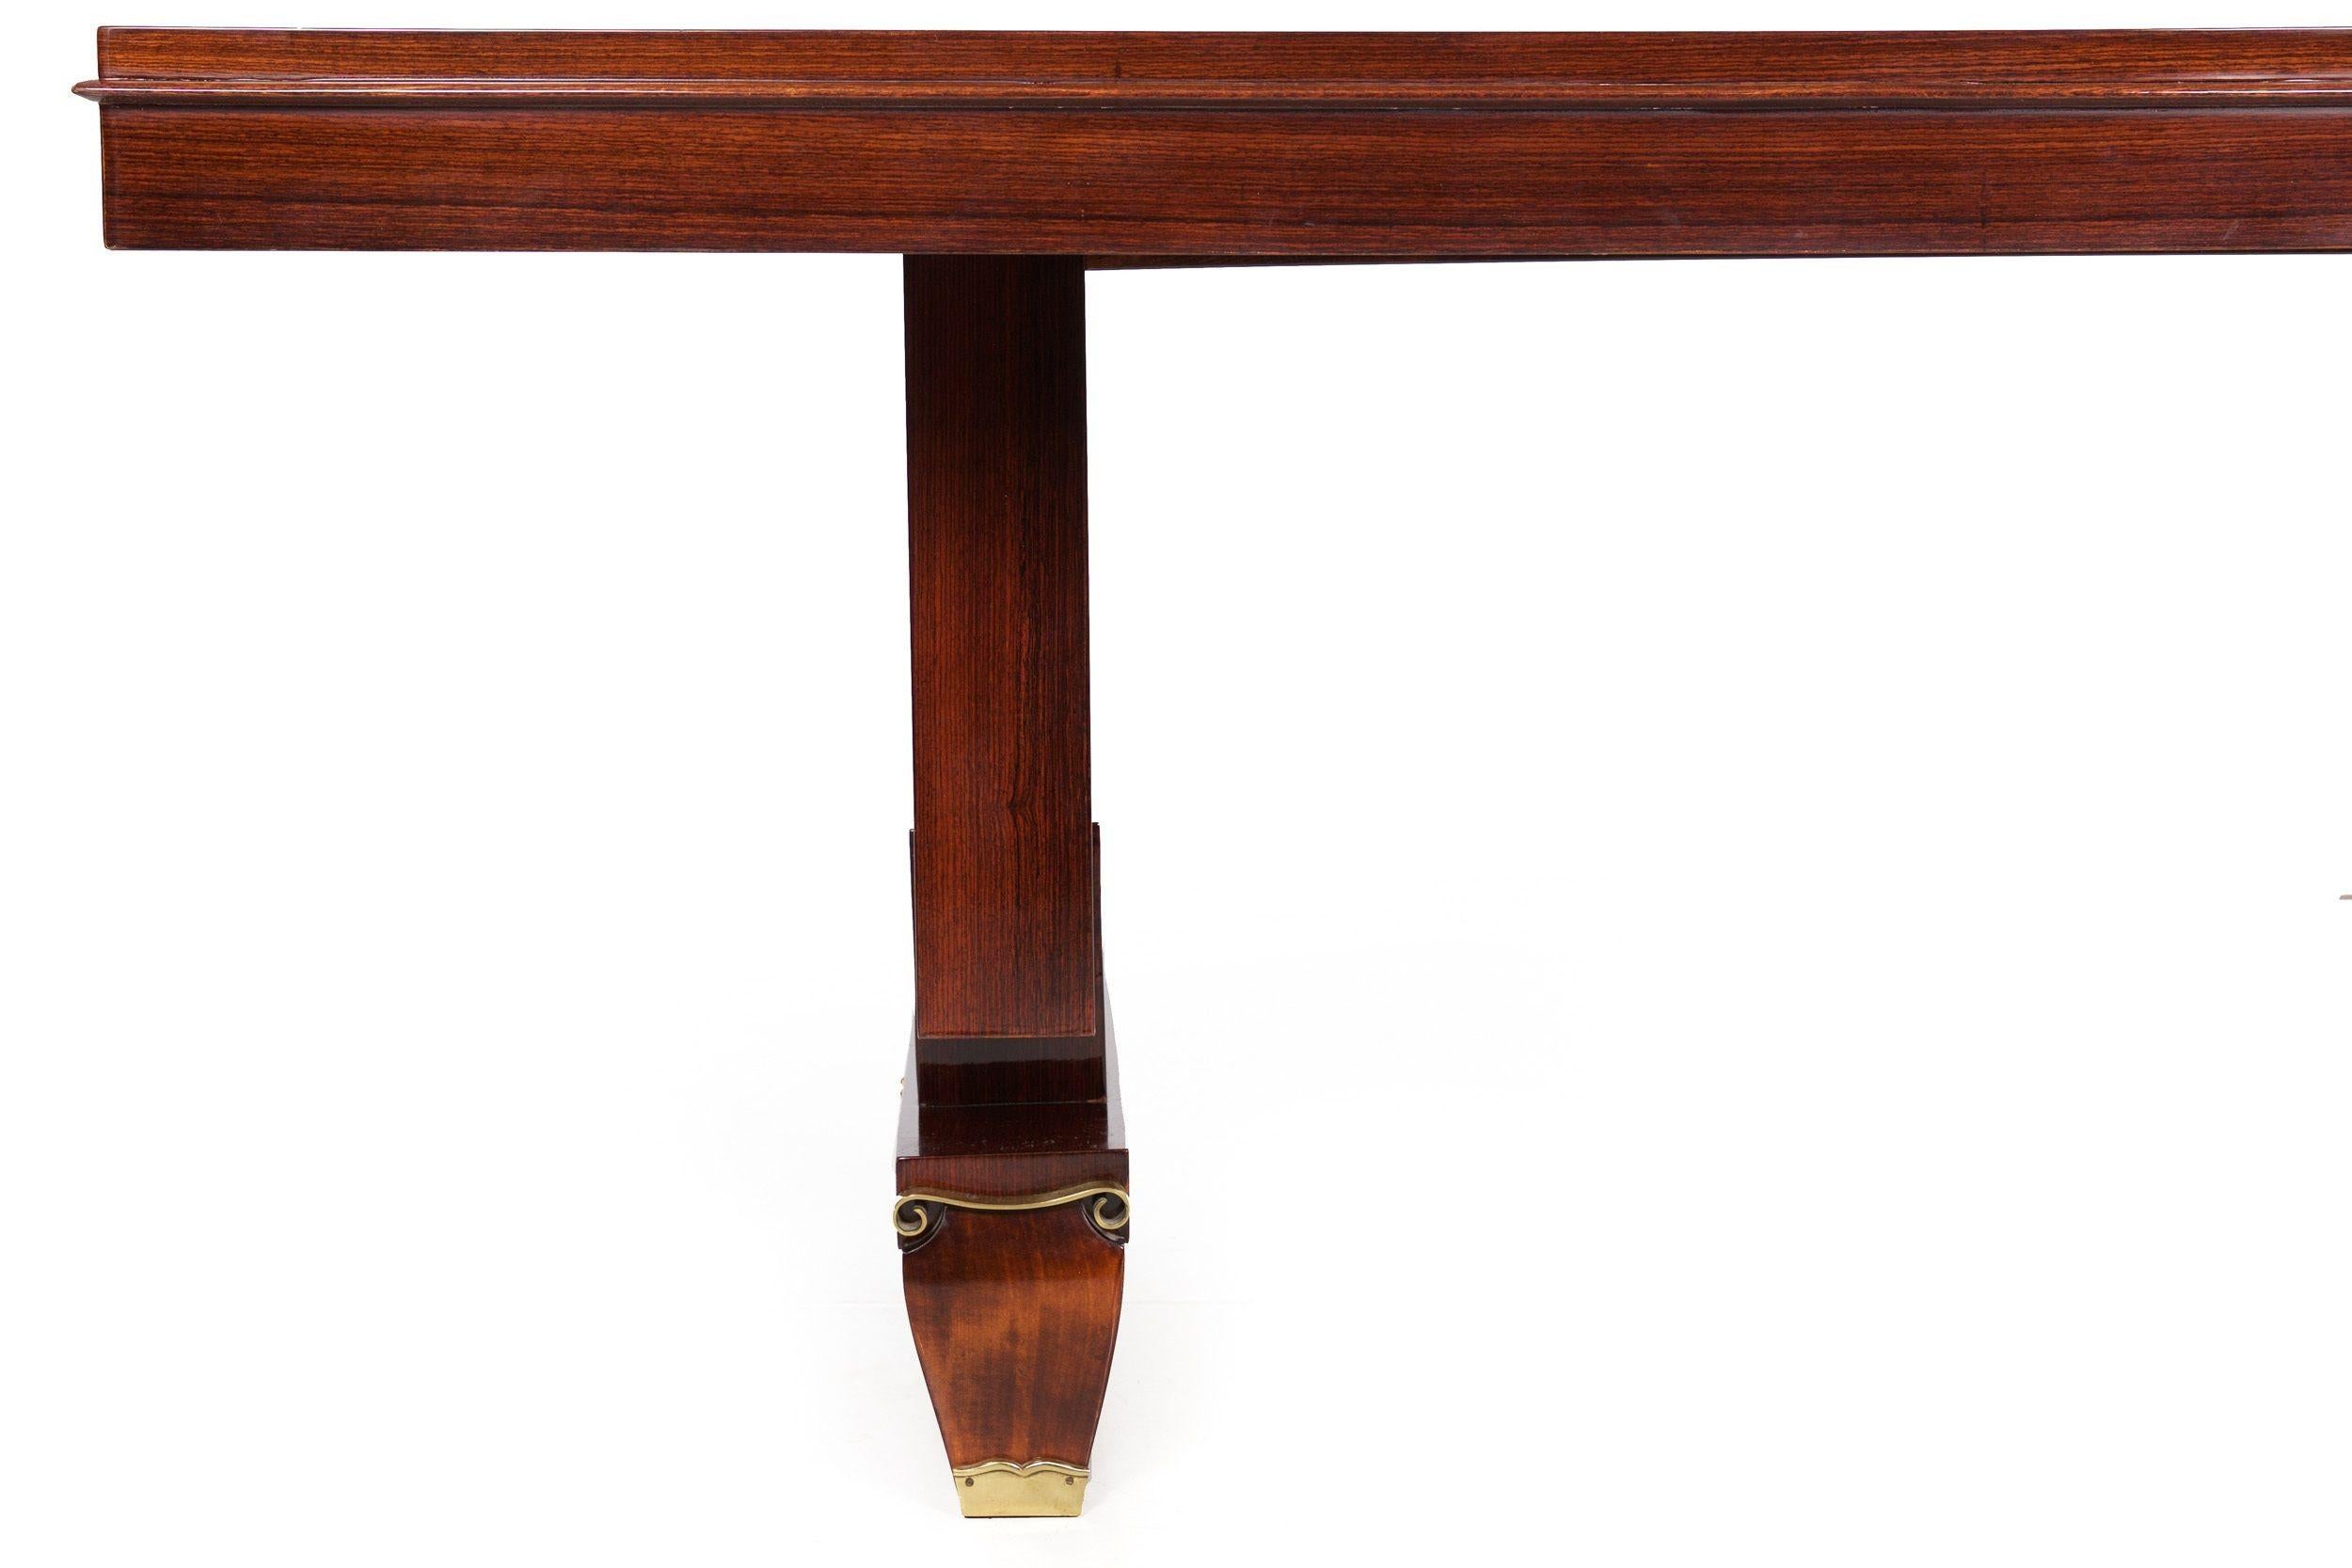 French Art Deco Inlaid Mother-of-Pearl Rosewood Dining Table, circa 1940s For Sale 3